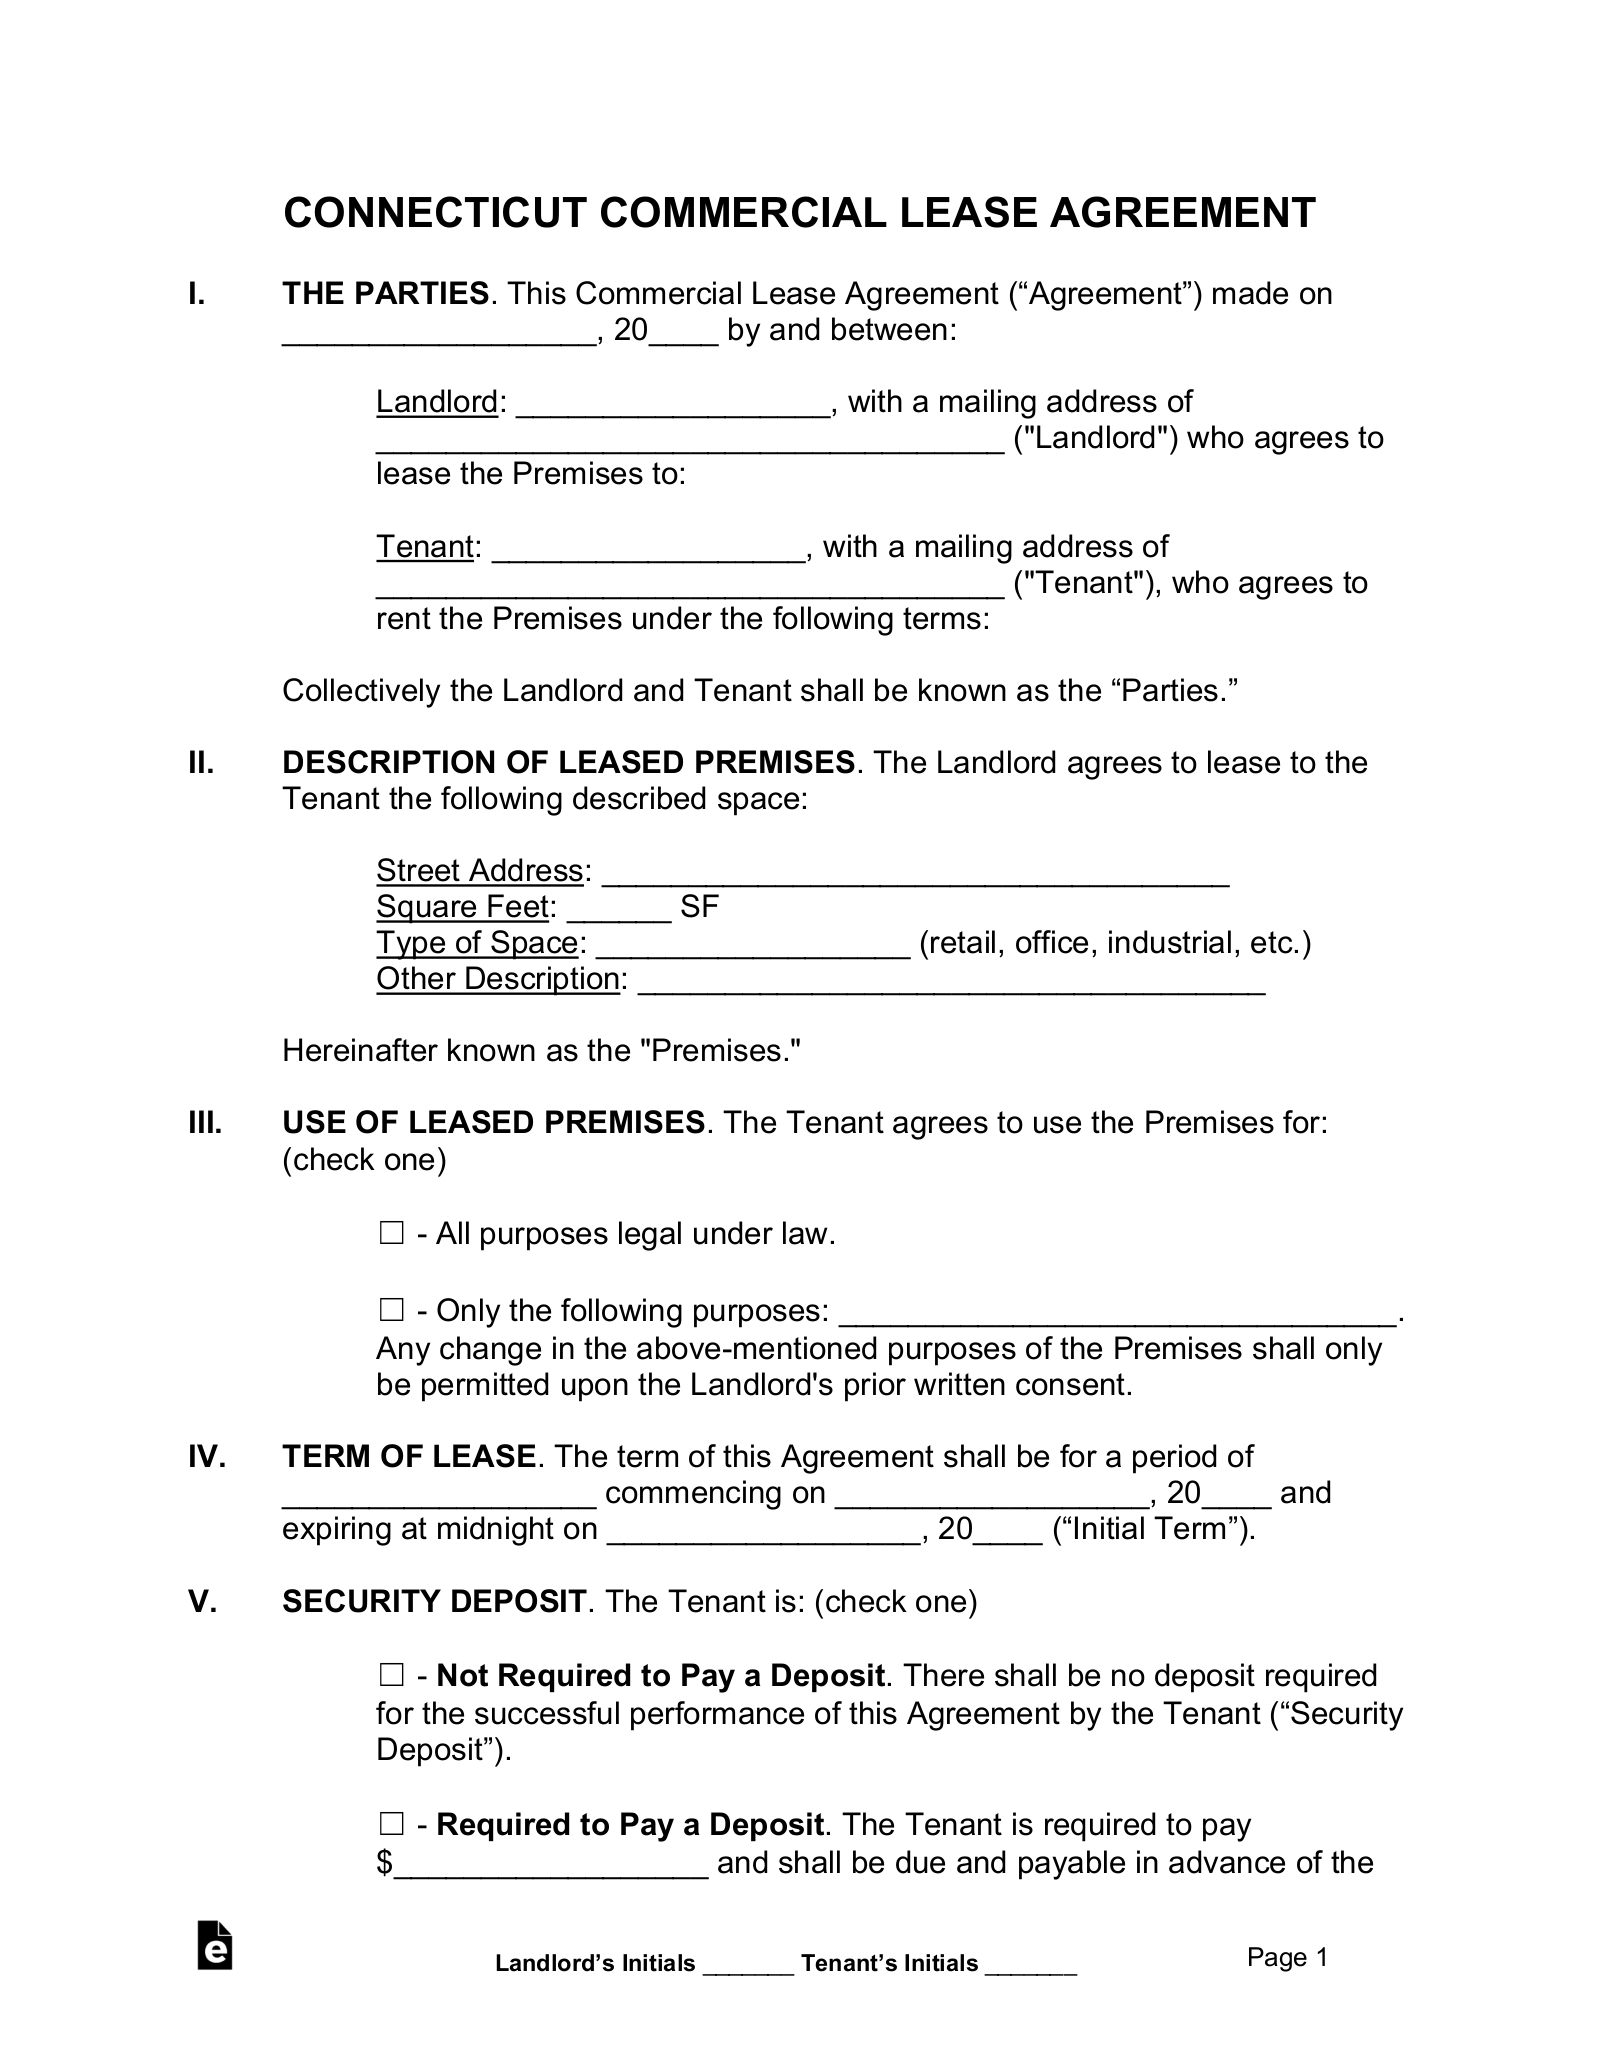 Connecticut Commercial Lease Agreement Template